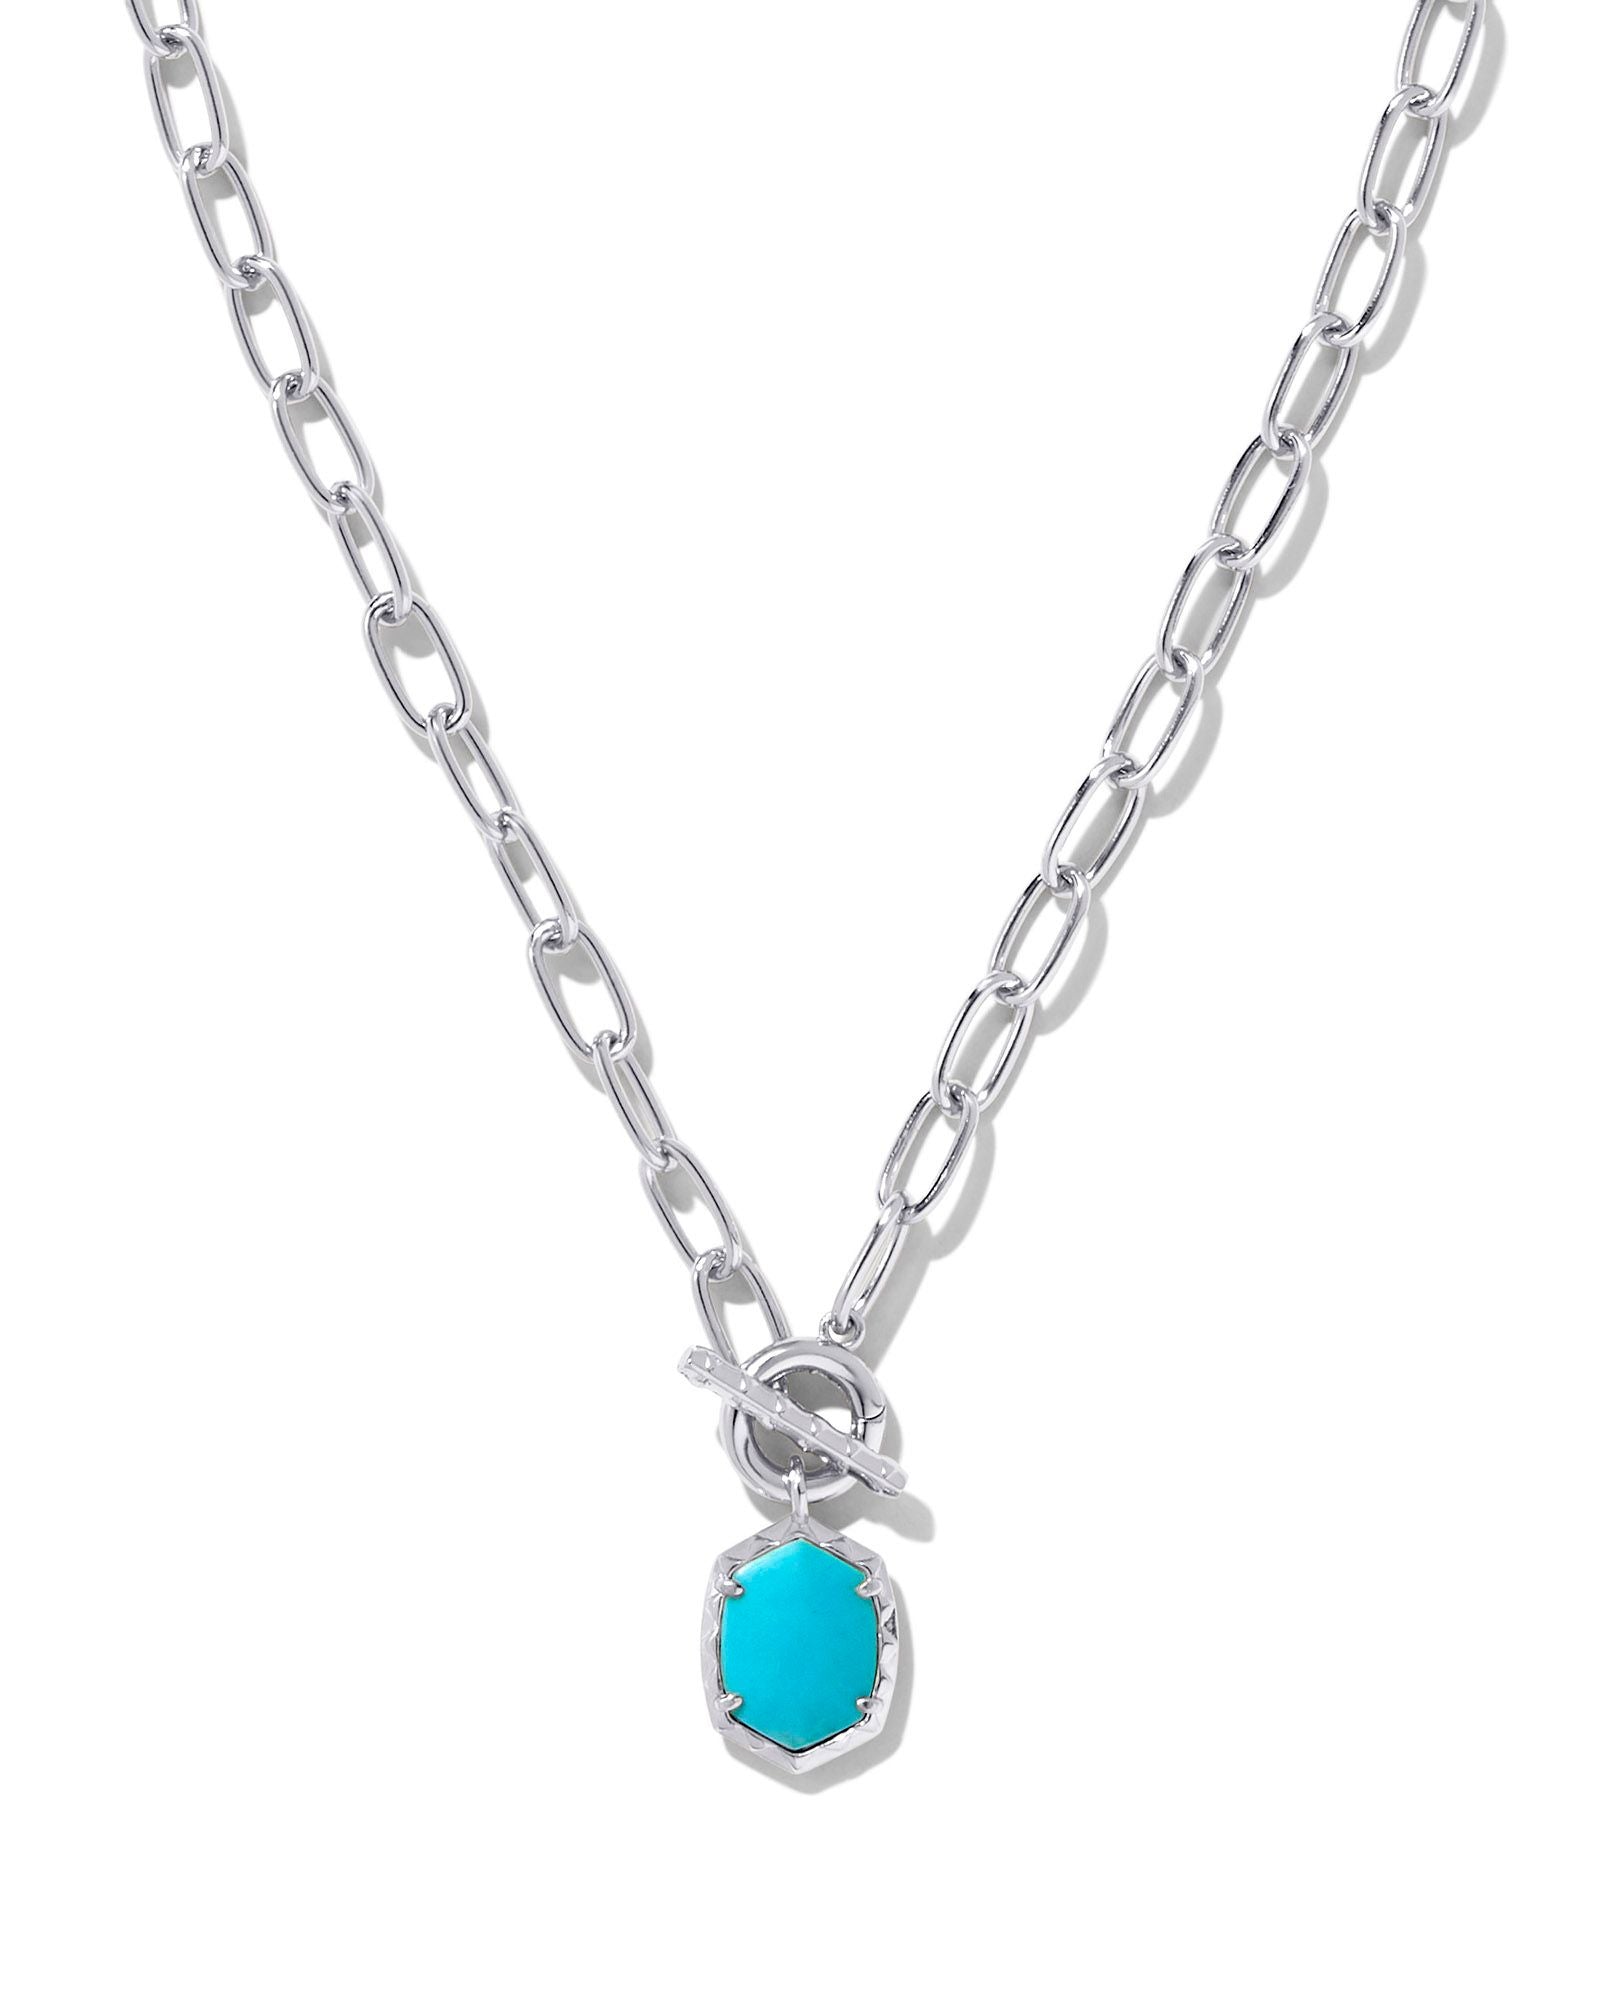 Daphne Silver Link and Chain Necklace Variegated Turquoise Magnesite